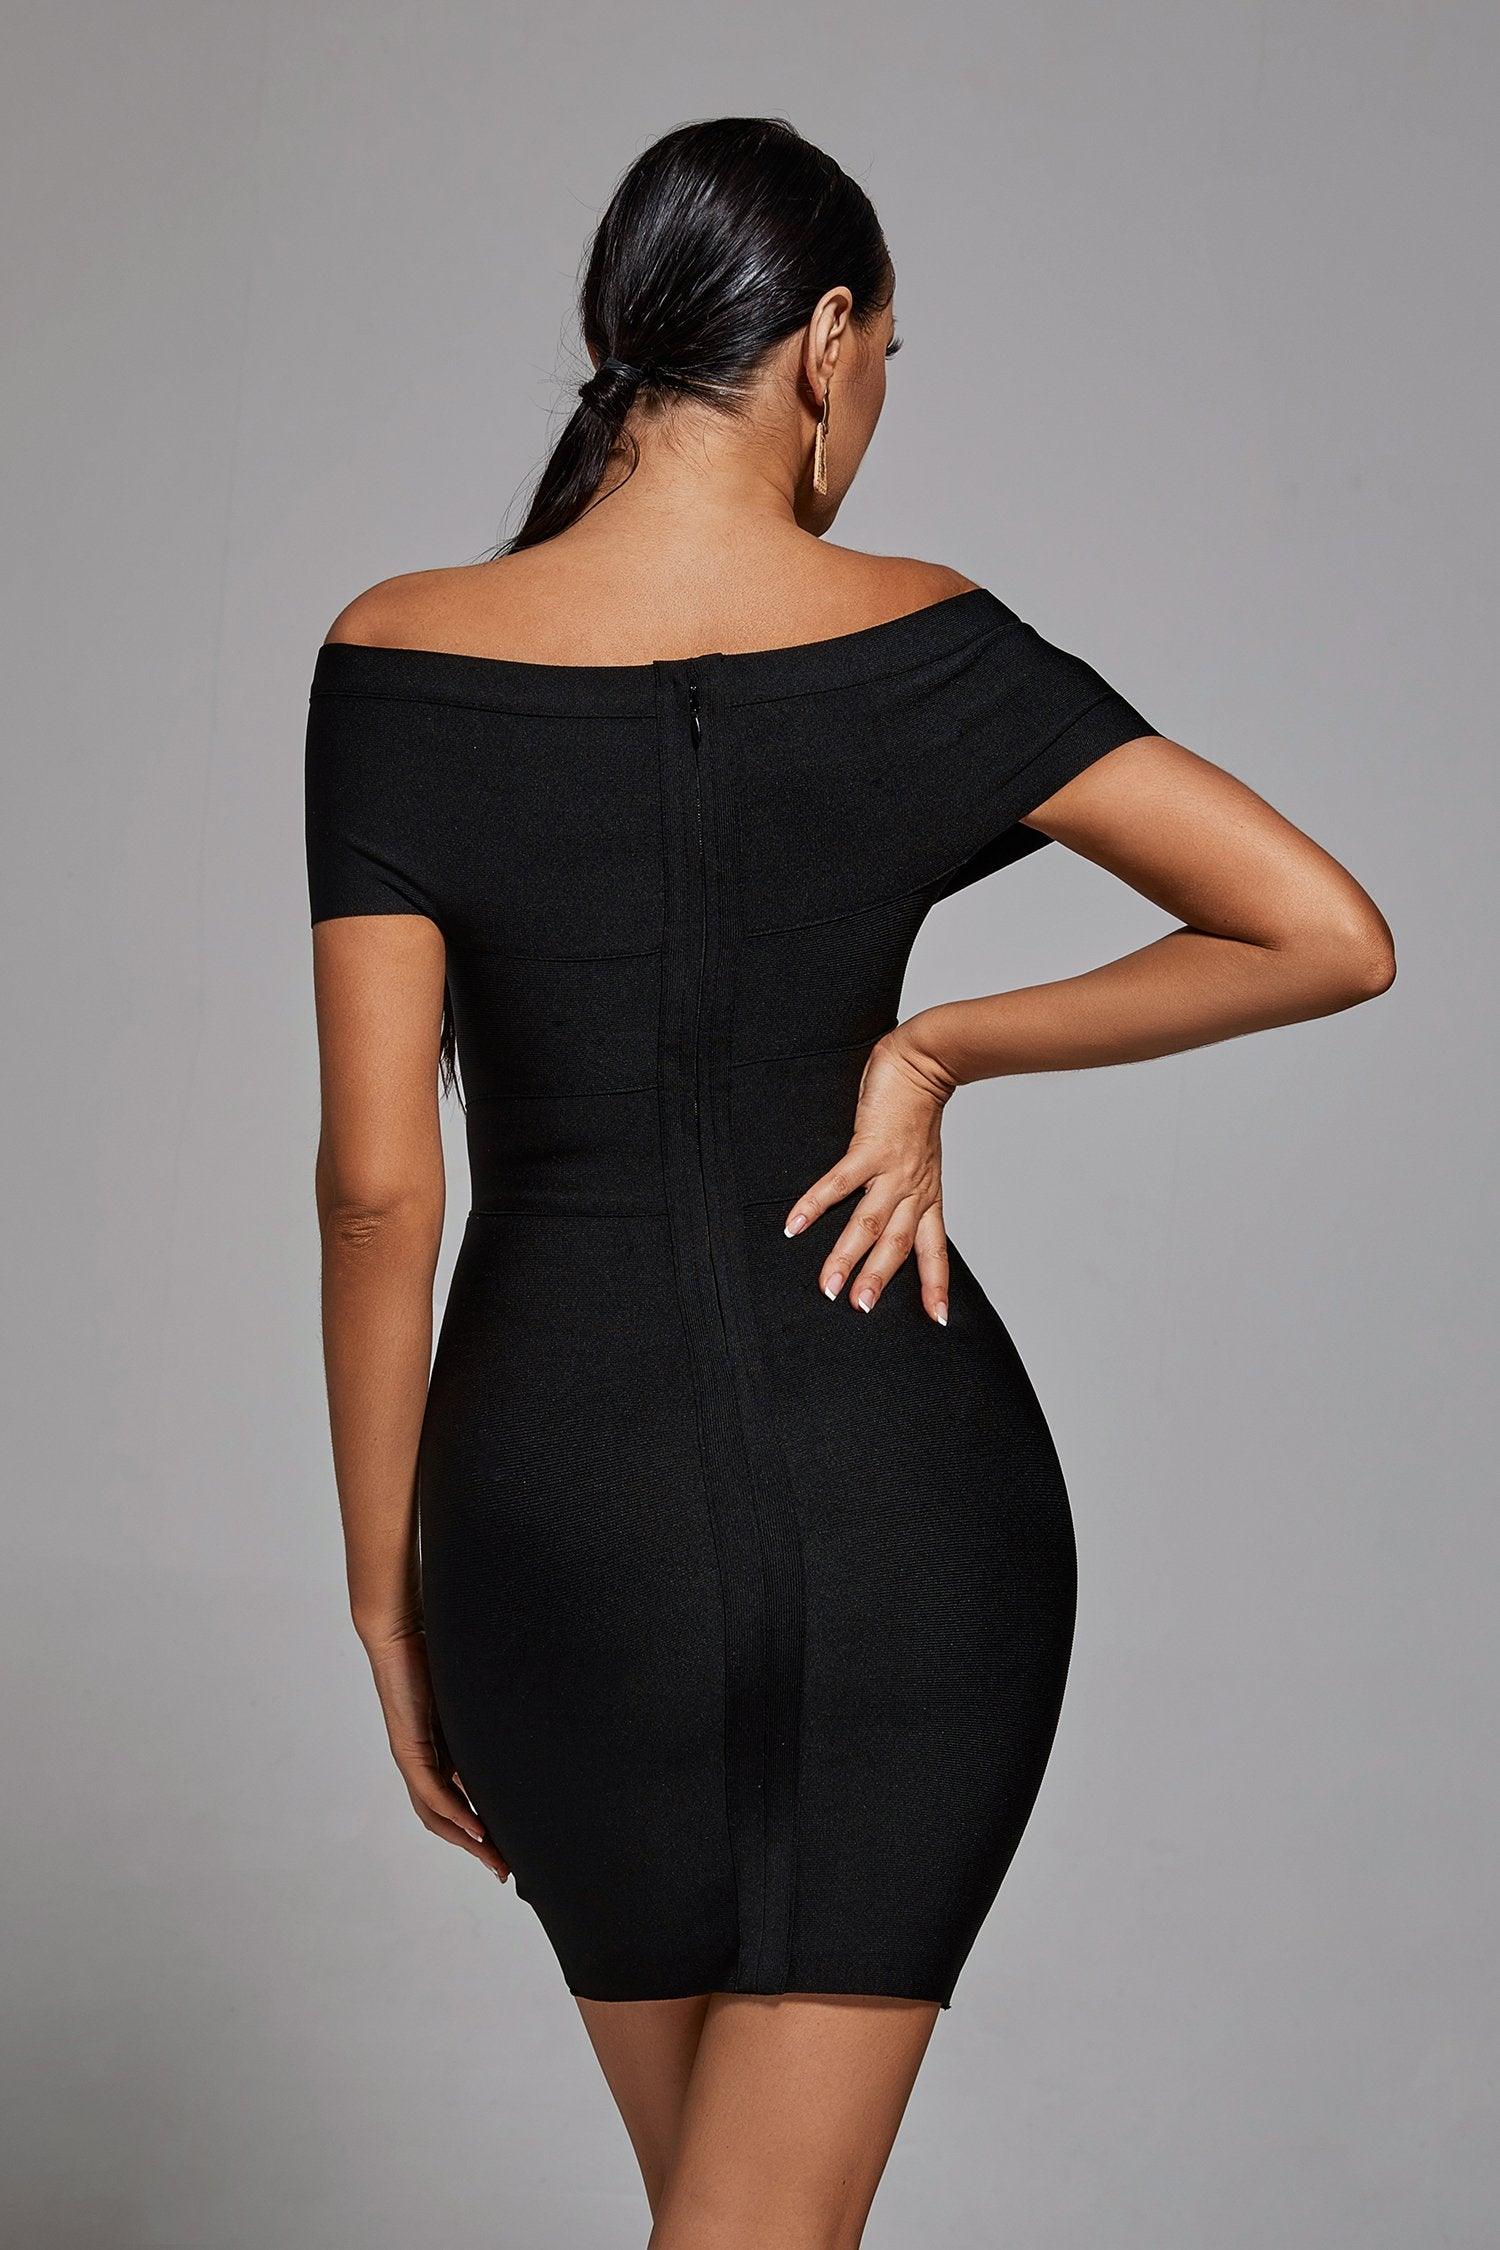 Loving this off shoulder bodycon dress from Urbanic 🍁🍁🍁 : r